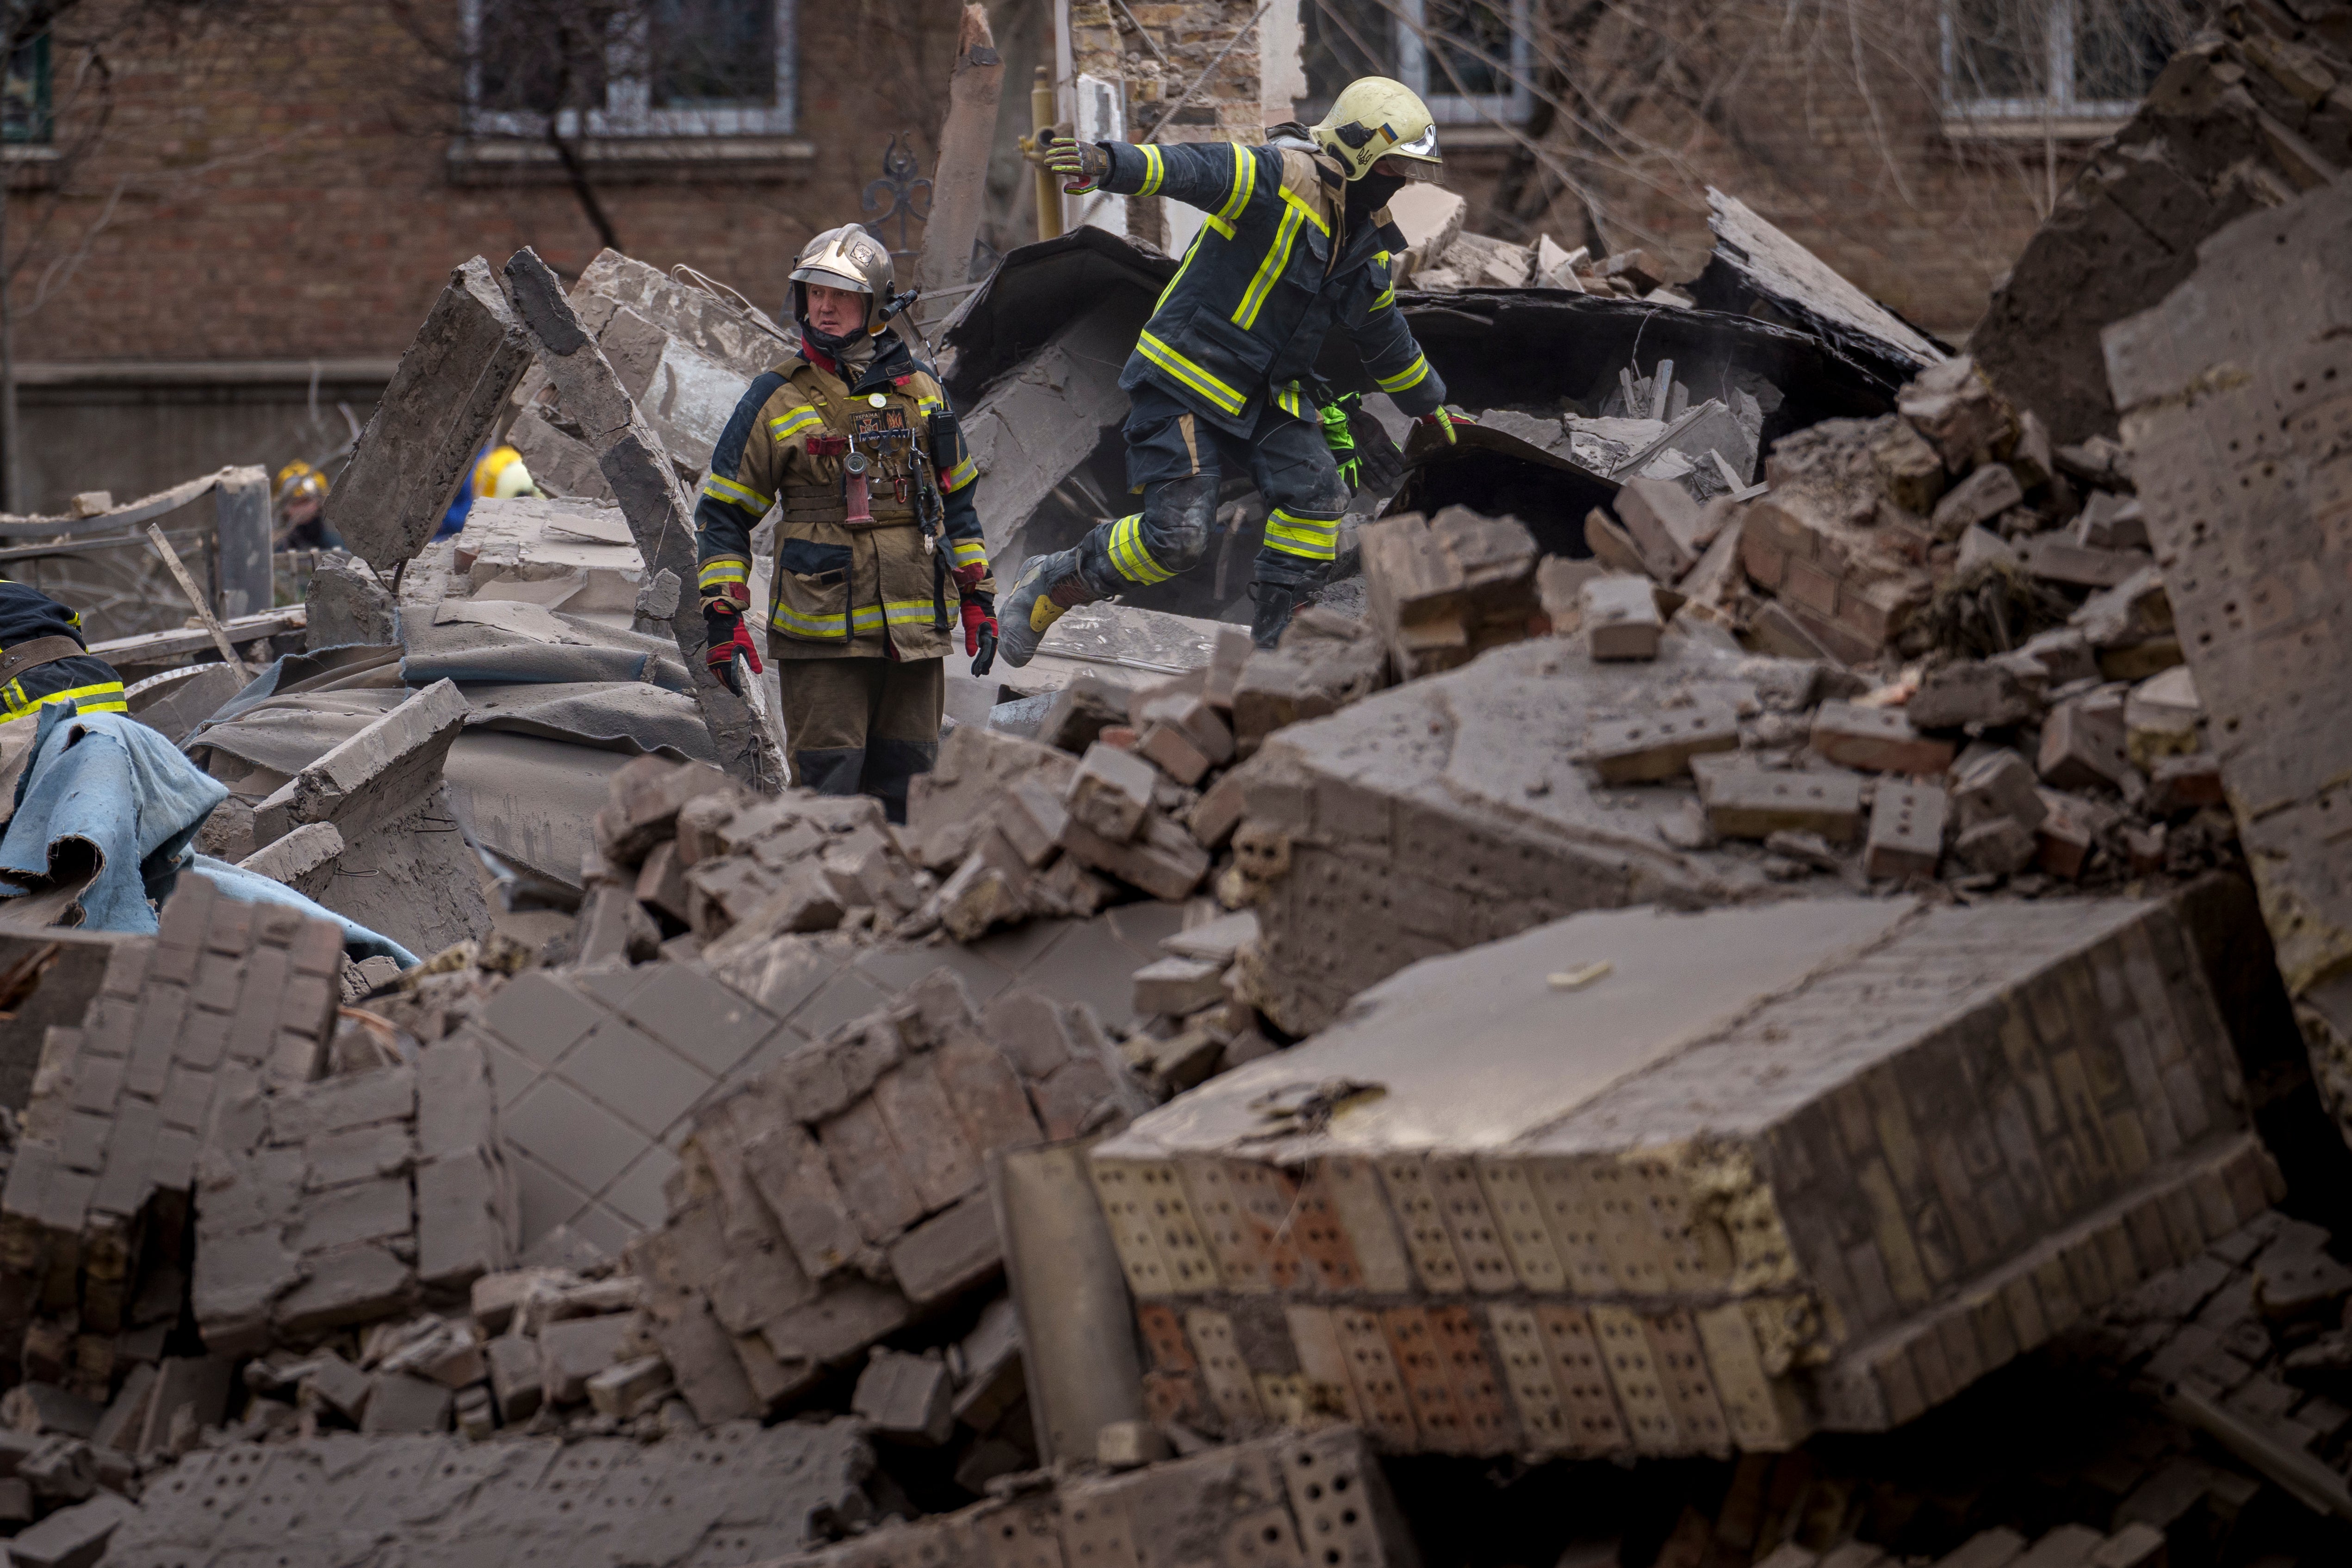 Ukrainian first responders walk in the rubble of a building in the Pecherskyi district, after a Russian air attack in Kyiv, Ukraine